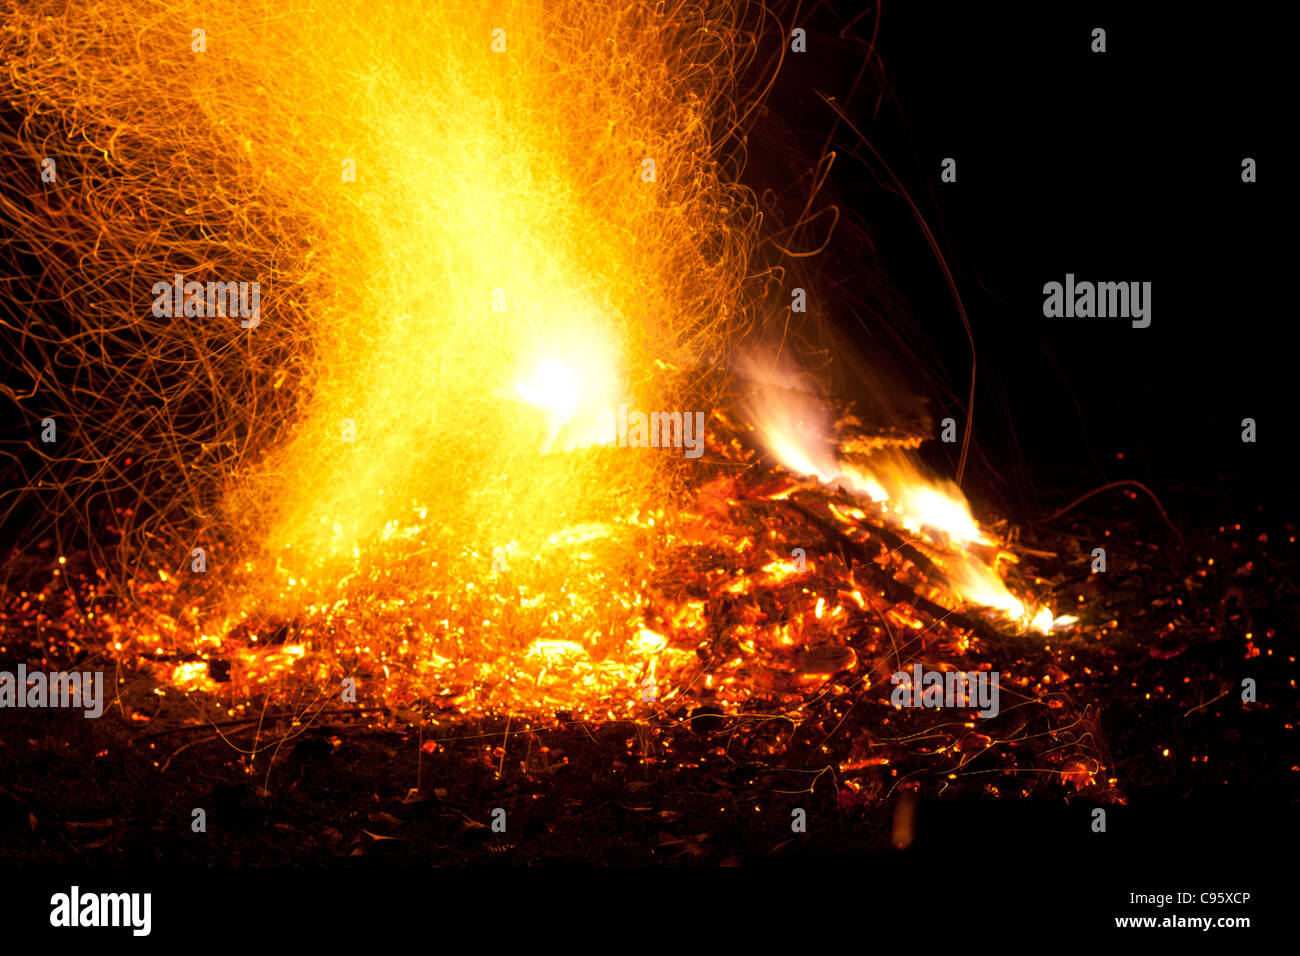 Fire with flames and sparks. Intense orange, yellow glow of bonfire ...